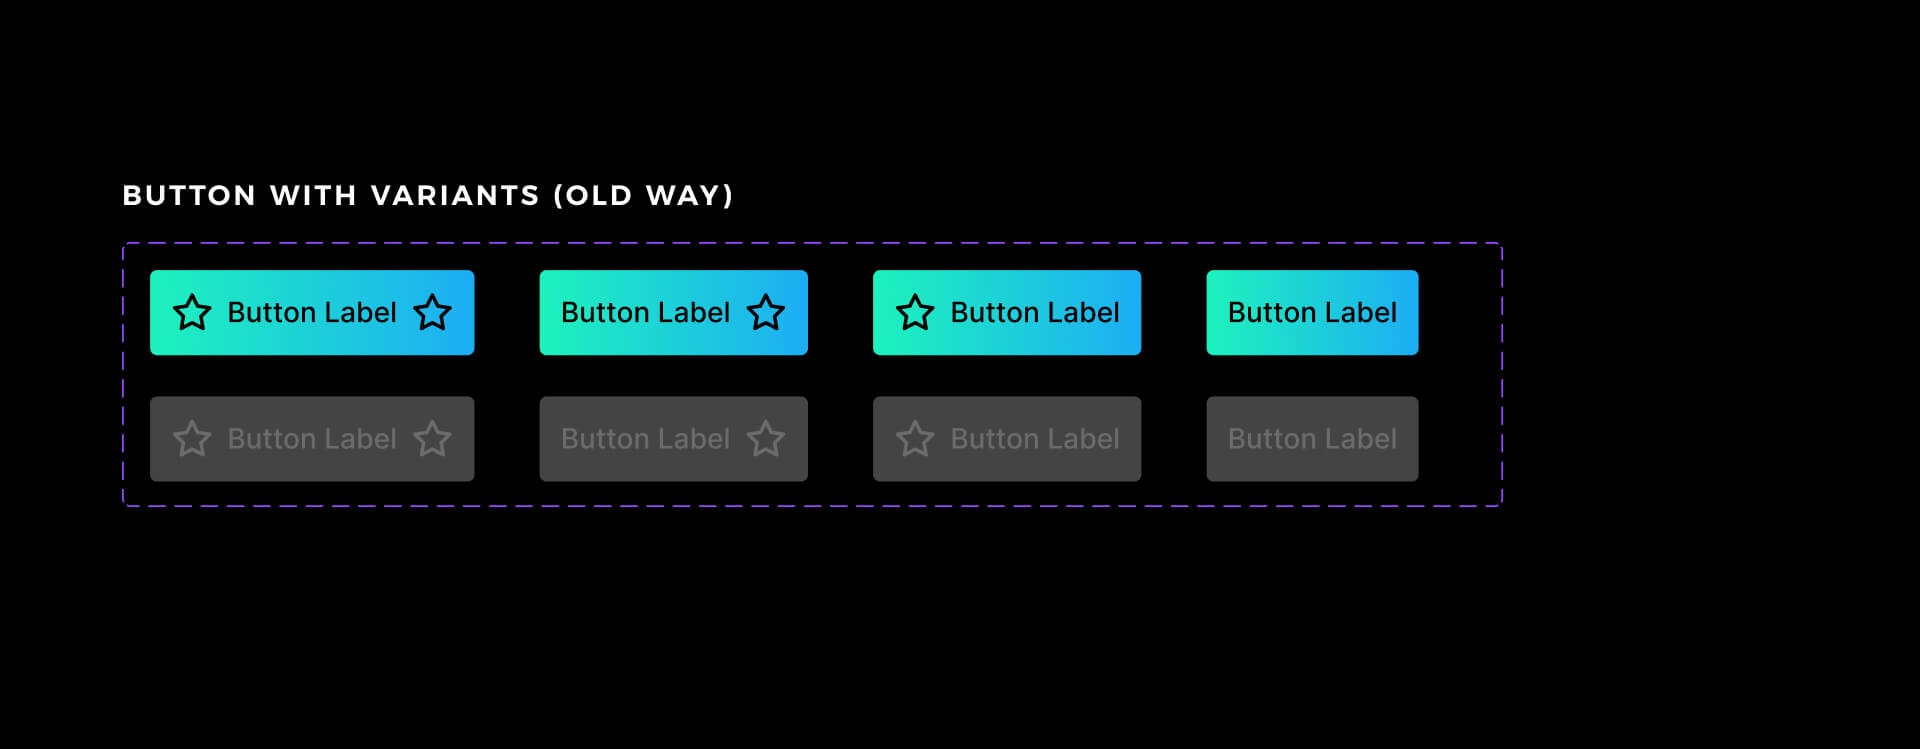 buttons created only with variants